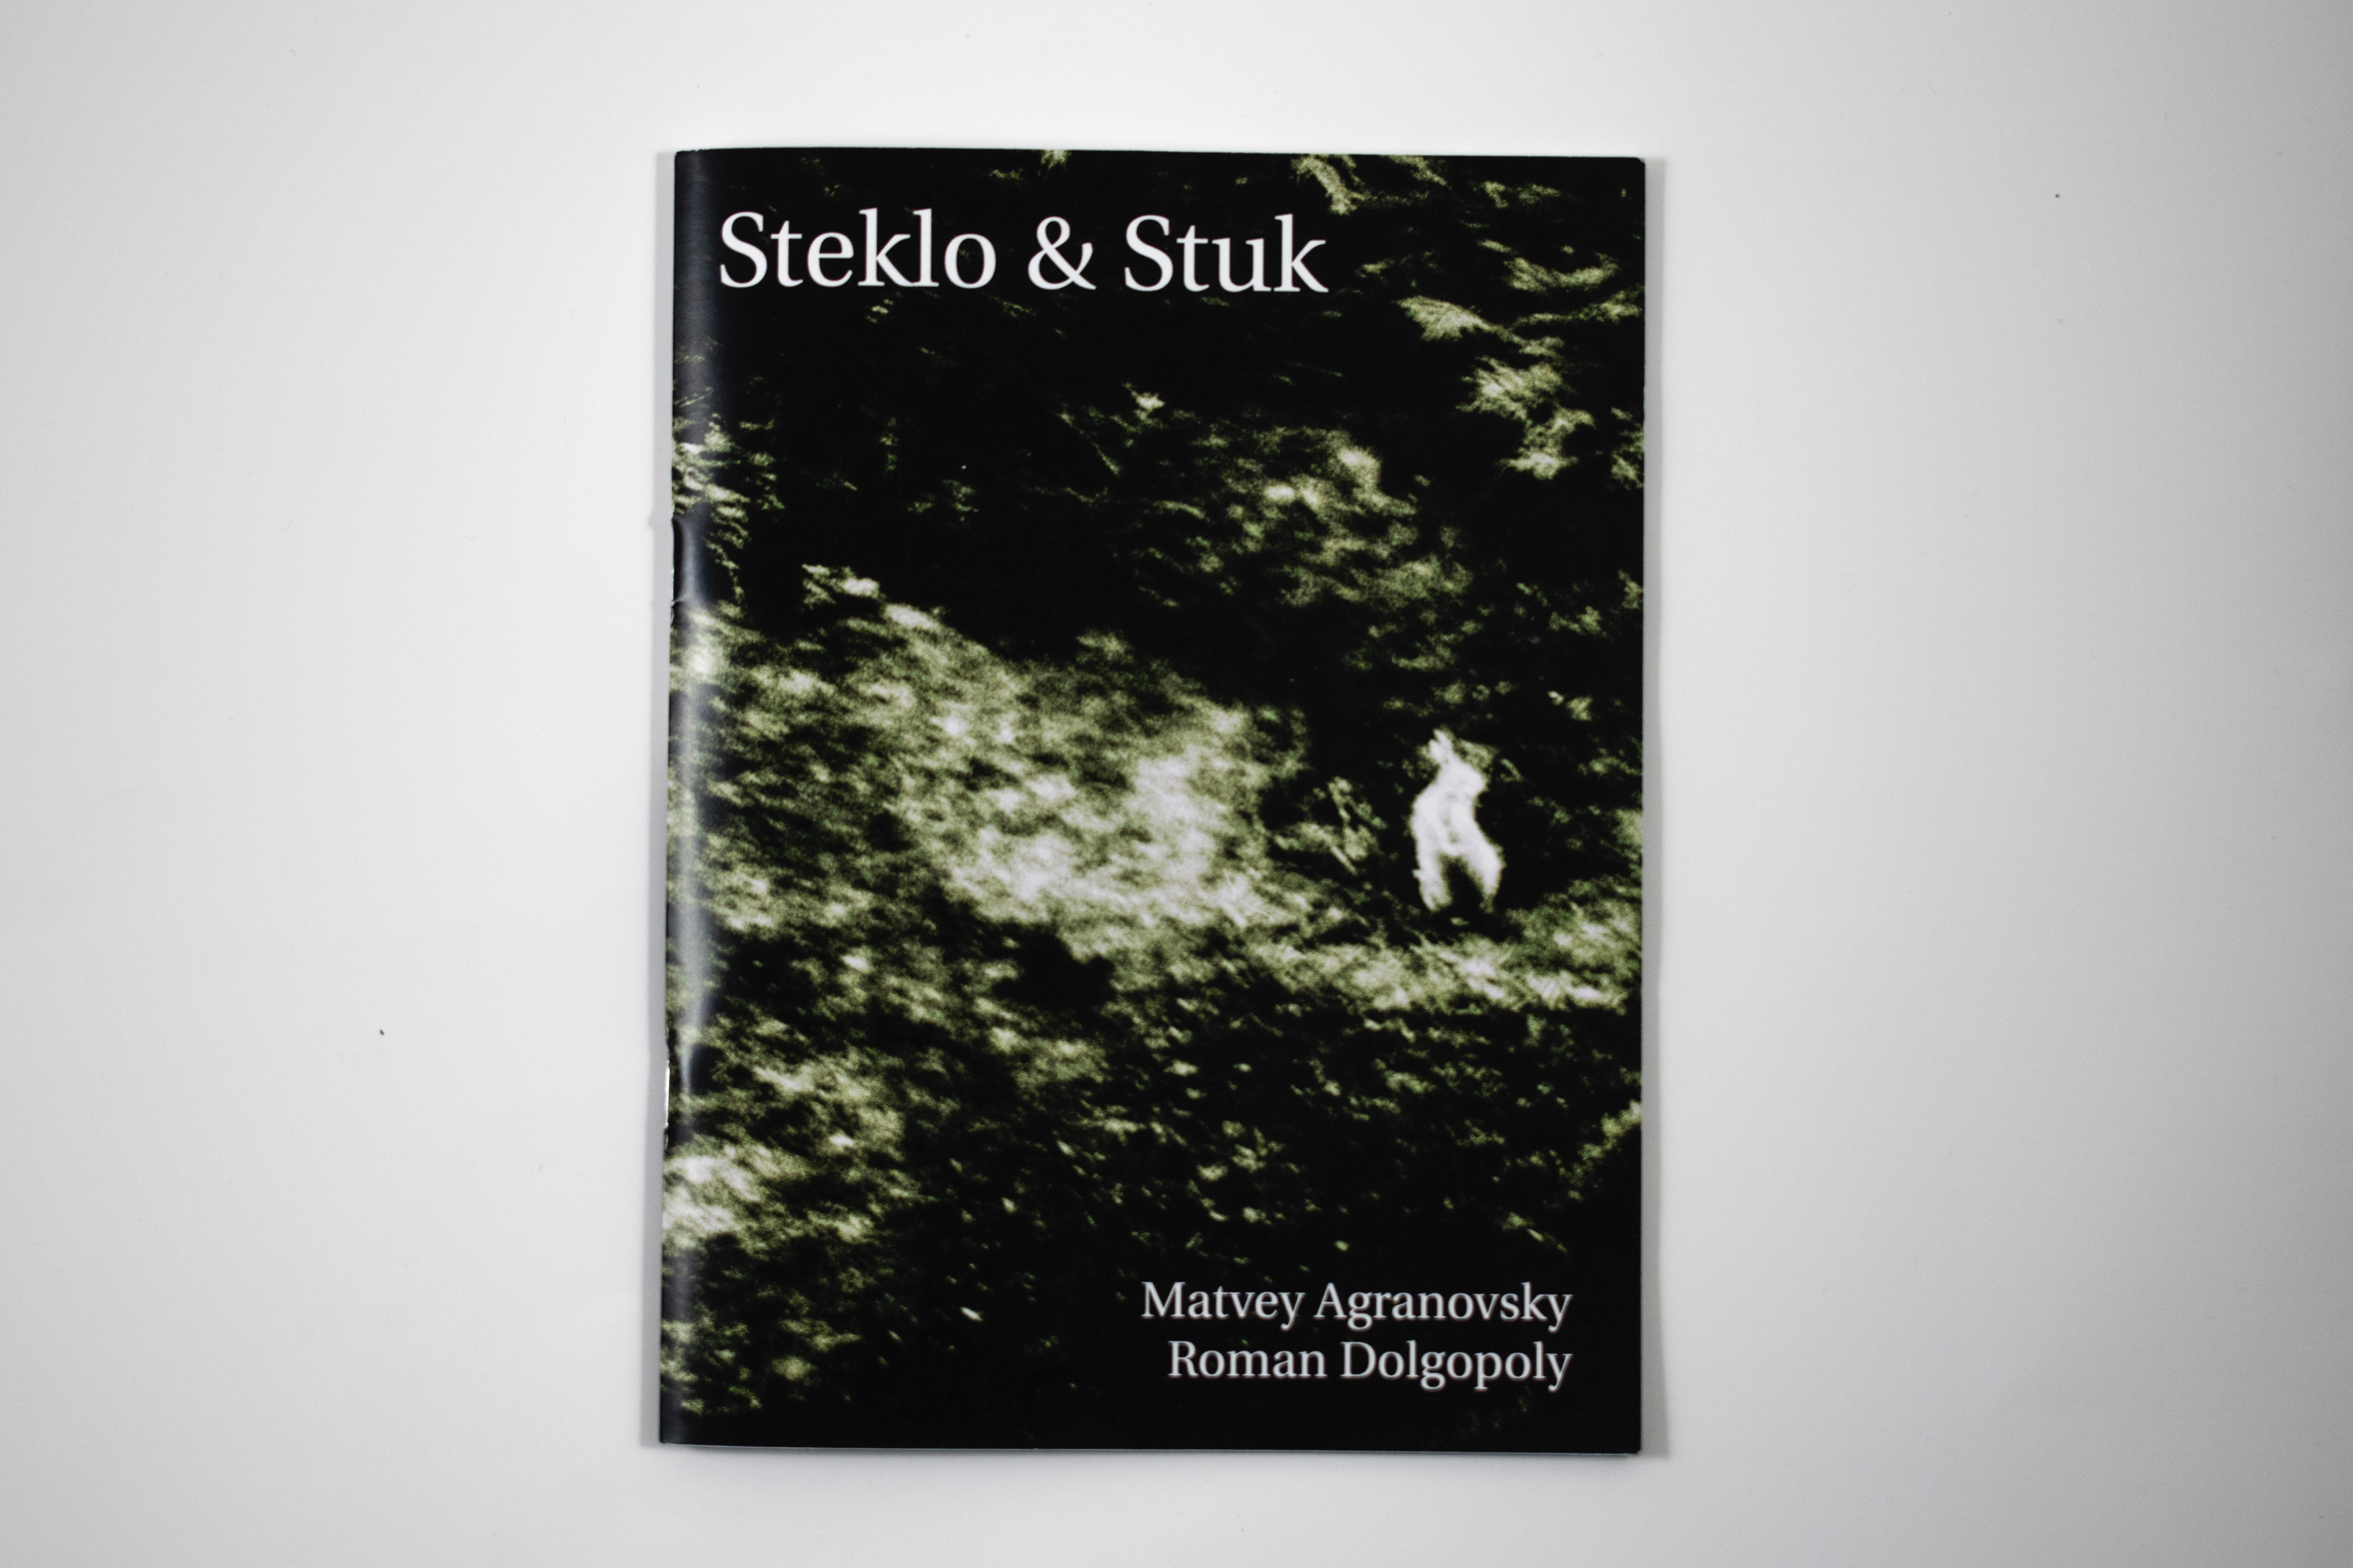 Steklo & Stuk by Roman Dolgopoly and me (published in August 2021)